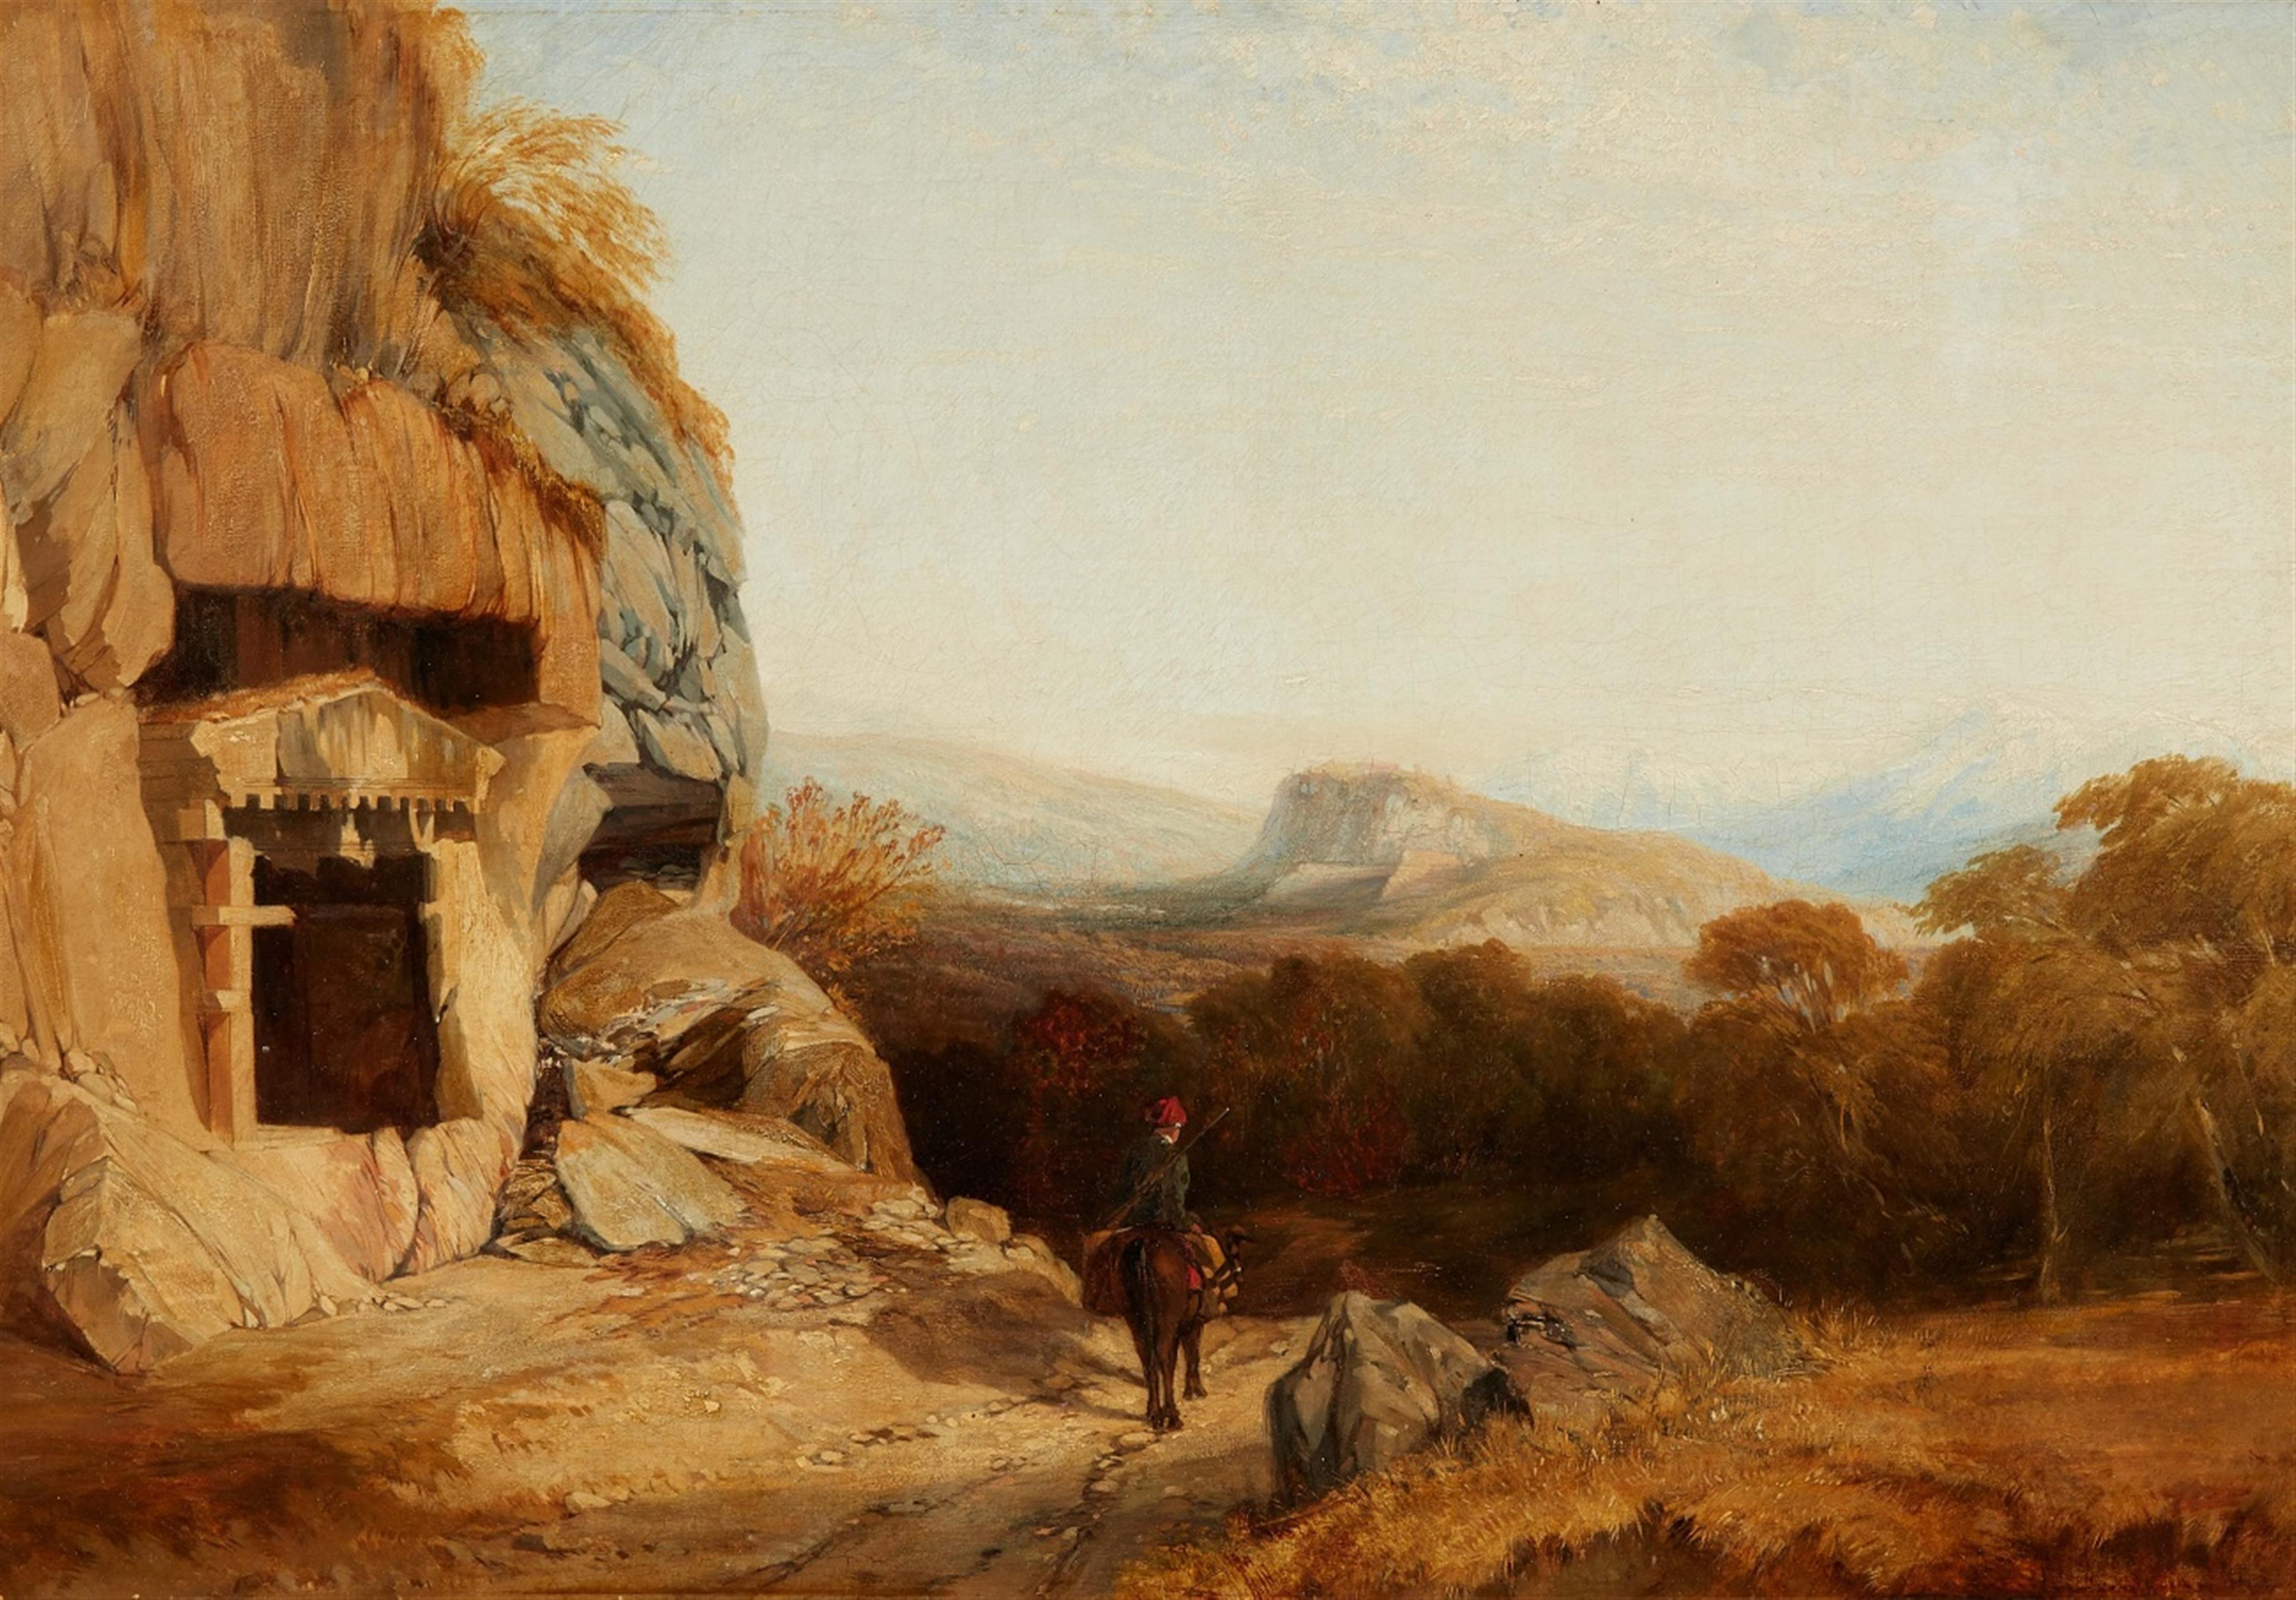 Harry John Johnson - Rock Tomb at Pinara with a View of Xanthos Valley in Asia Minor - image-1